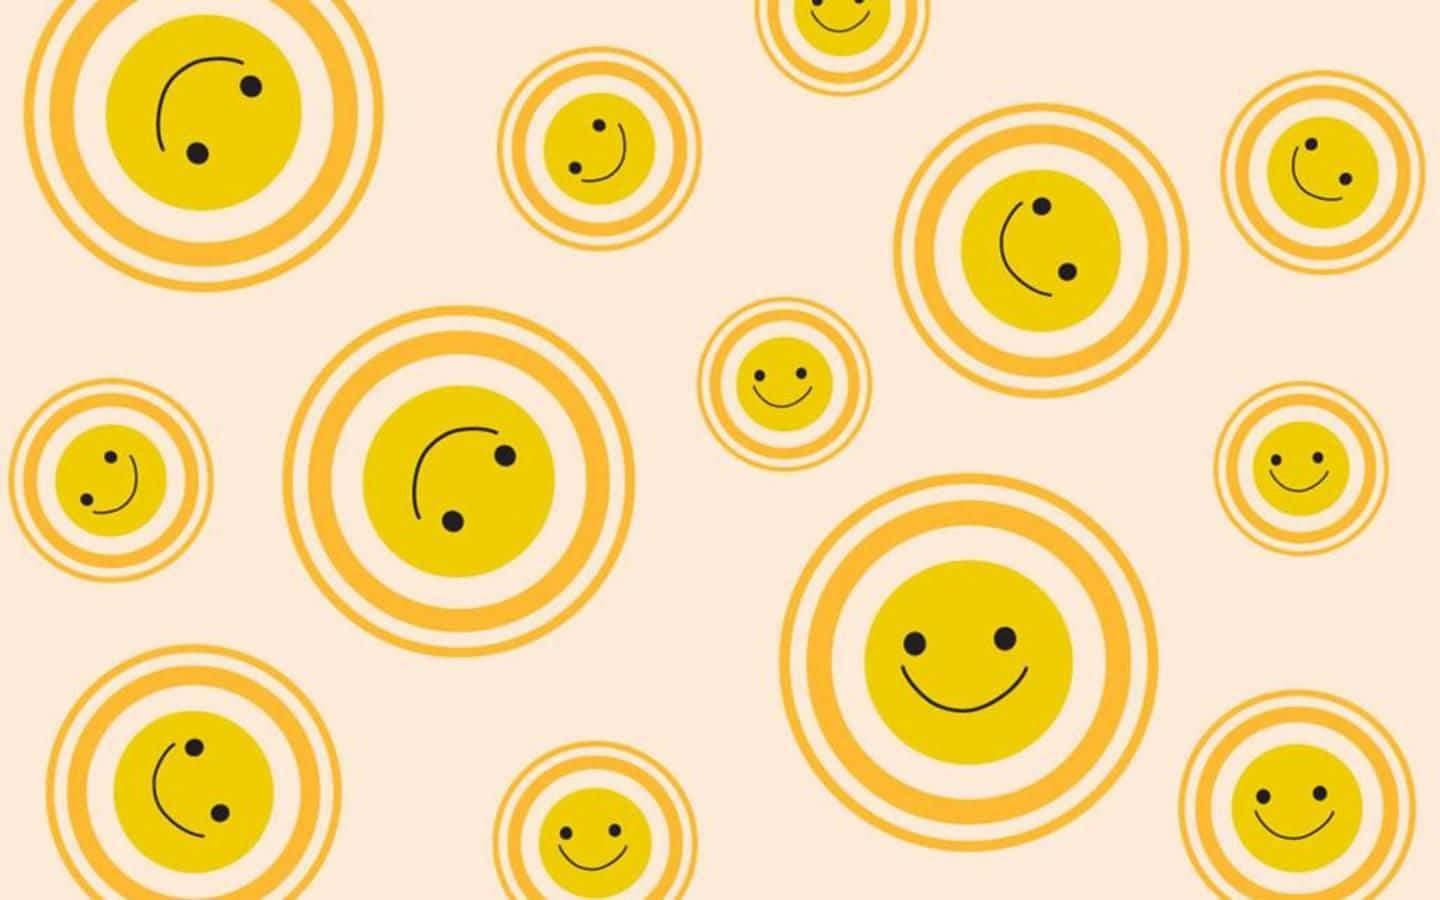 A Yellow Smiley Face Pattern With Circles Wallpaper